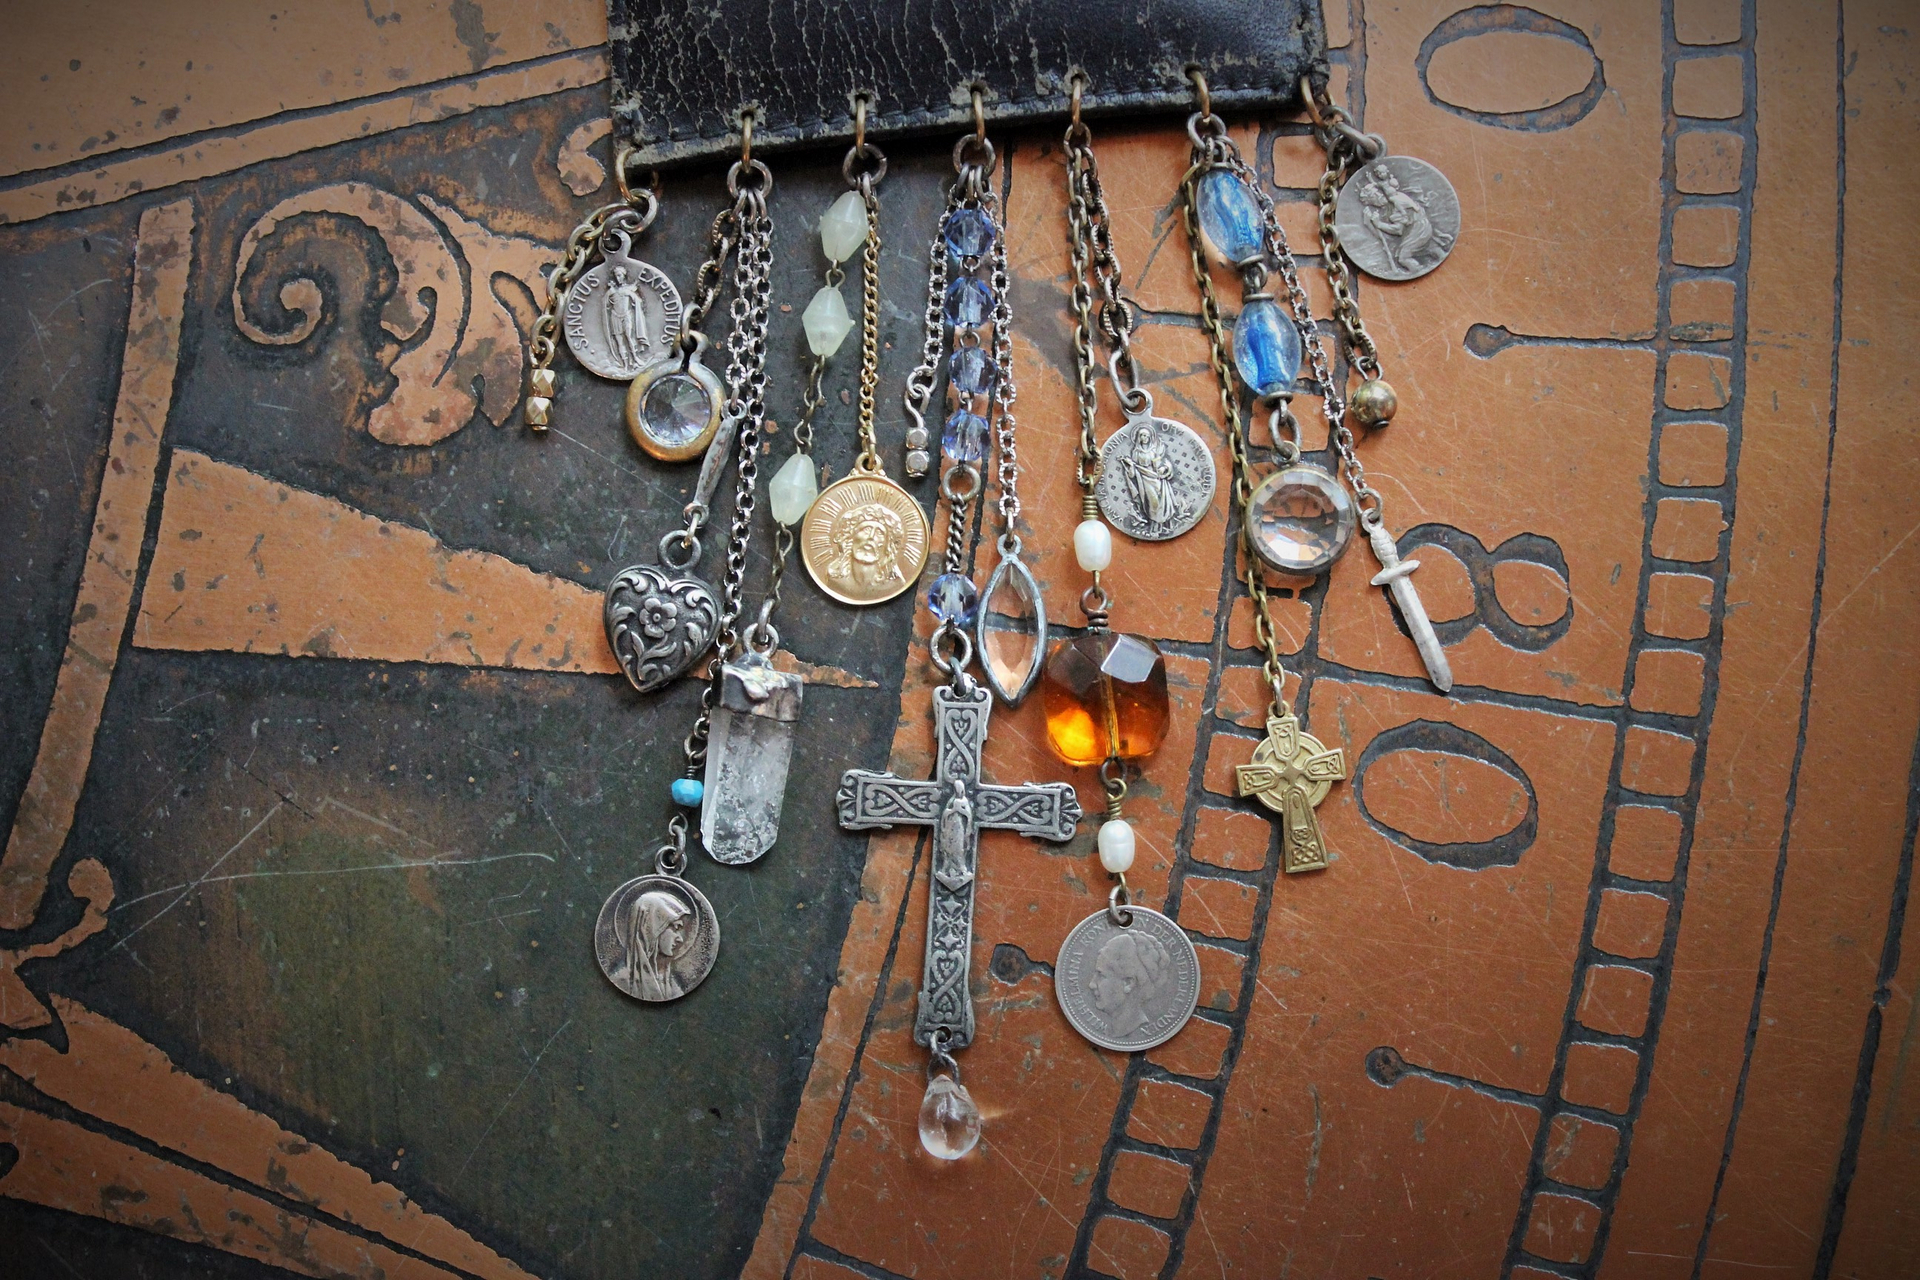 Rustic Antique Leather Pouch Necklace with Antique Passion of Christ Scapular Pocket,Antique & Vintage Medals, Crosses, Dangles, Crystals & Chains